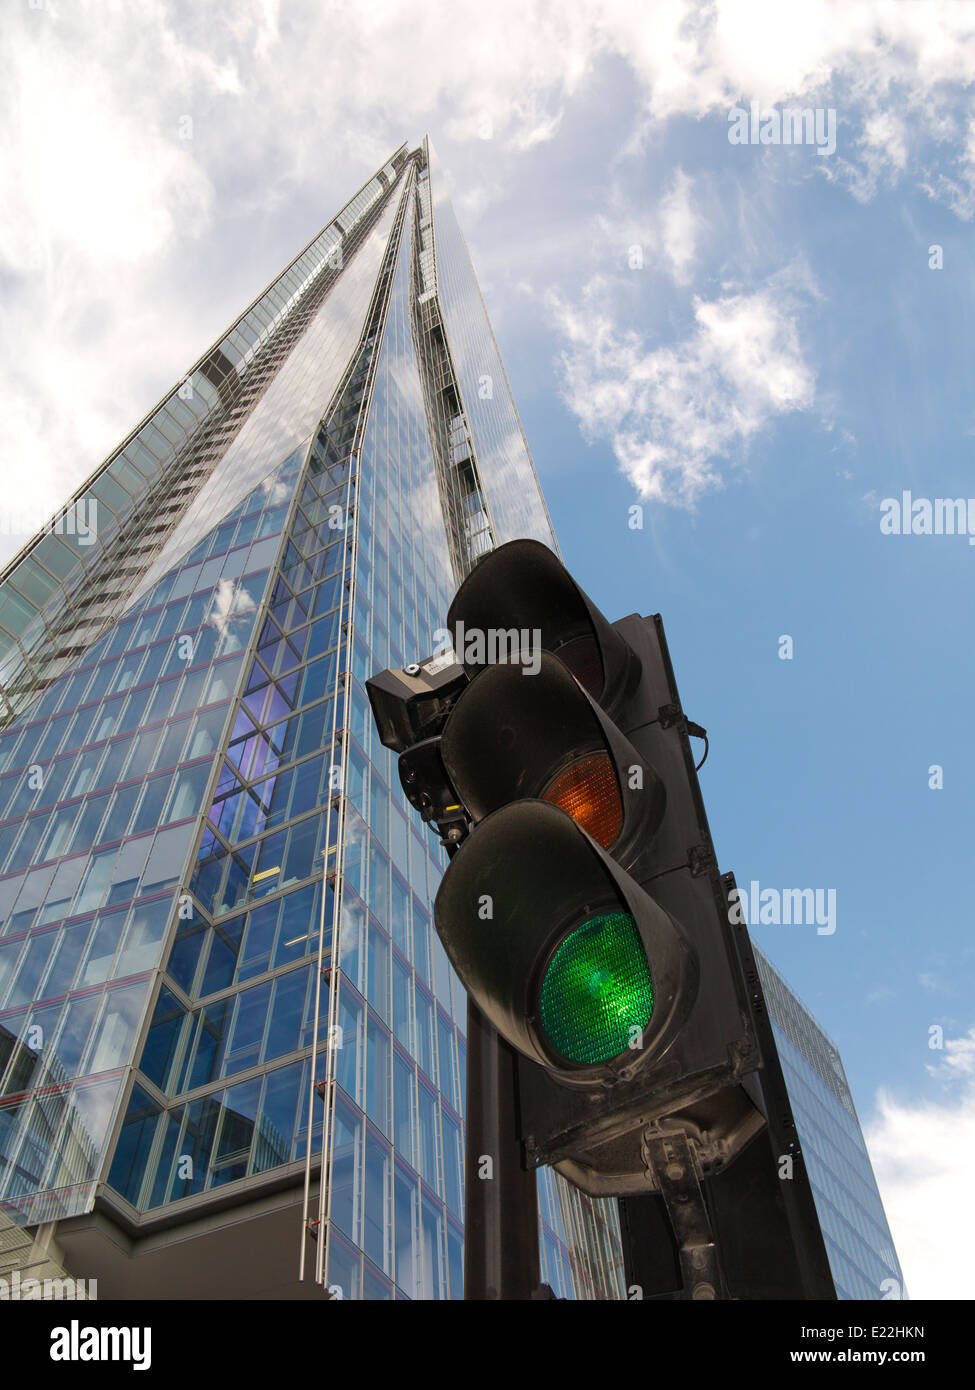 A wide angle of The London Shard against a dramatic blue and white sky with traffic light in foreground showing green for go Stock Photo